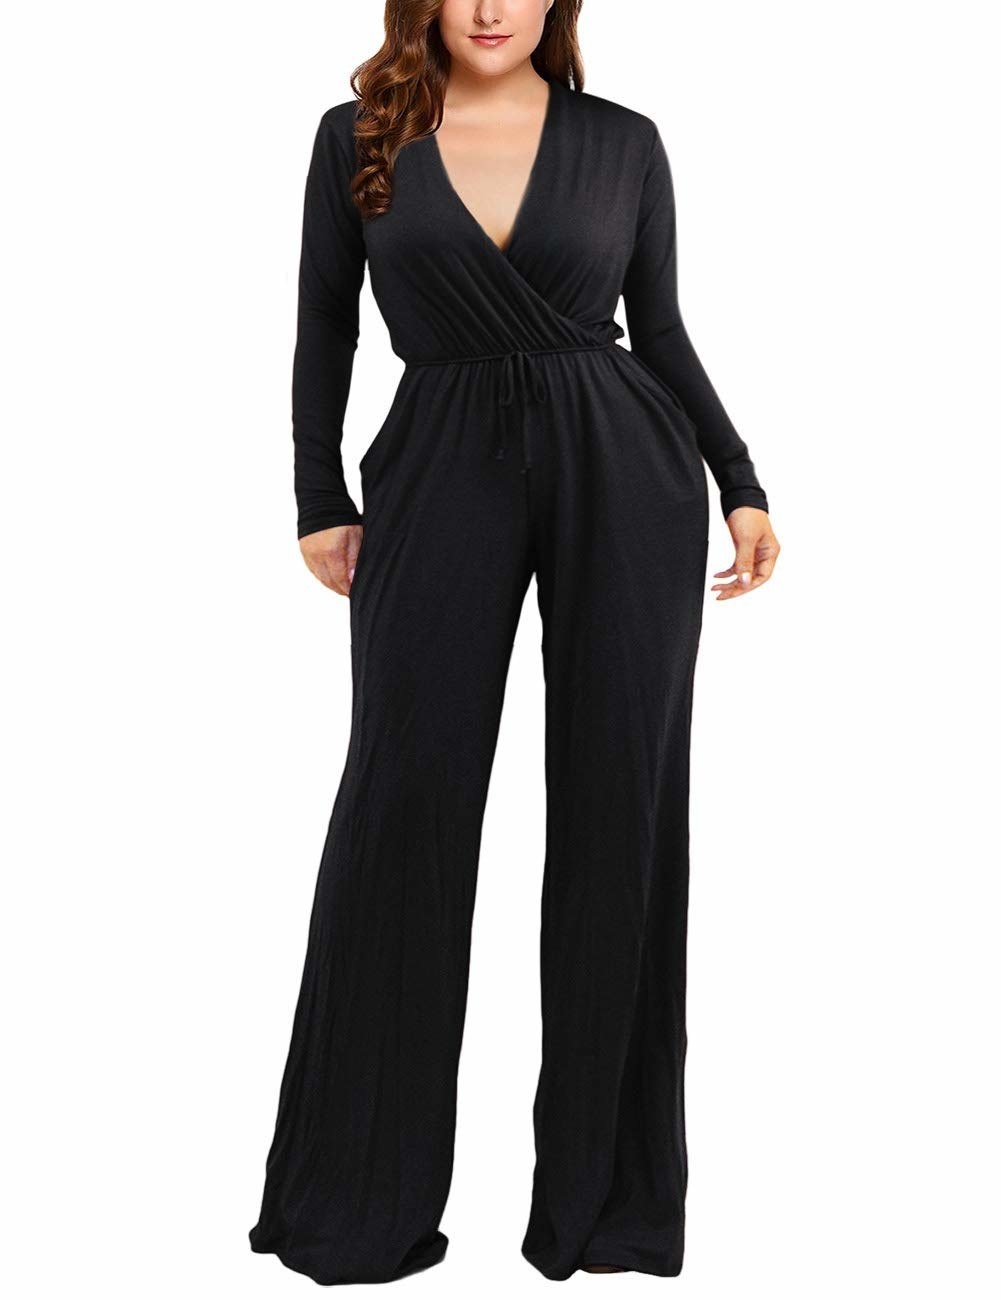 24 Jumpsuits So Awesome You'll Strut Every Time You Wear Them